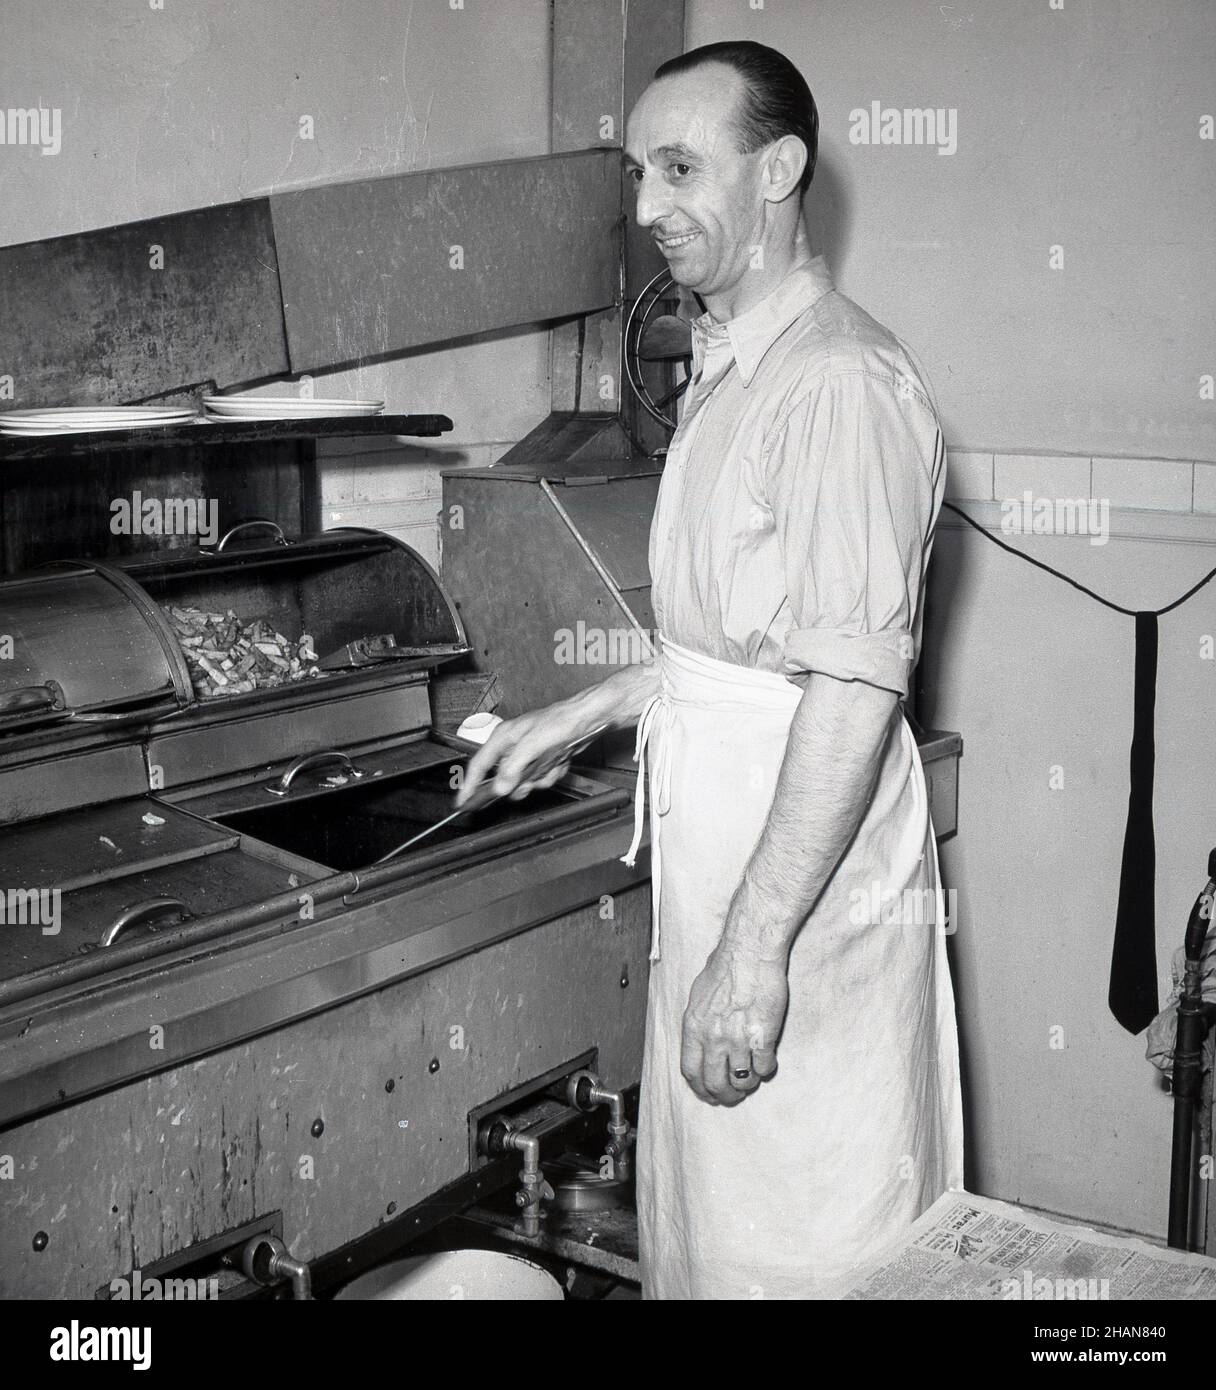 1951, historical, a male cafe owner in his kitchen, wearing a waist or half apron, standing at the fryer cooking food, London, England, UK. Stock Photo